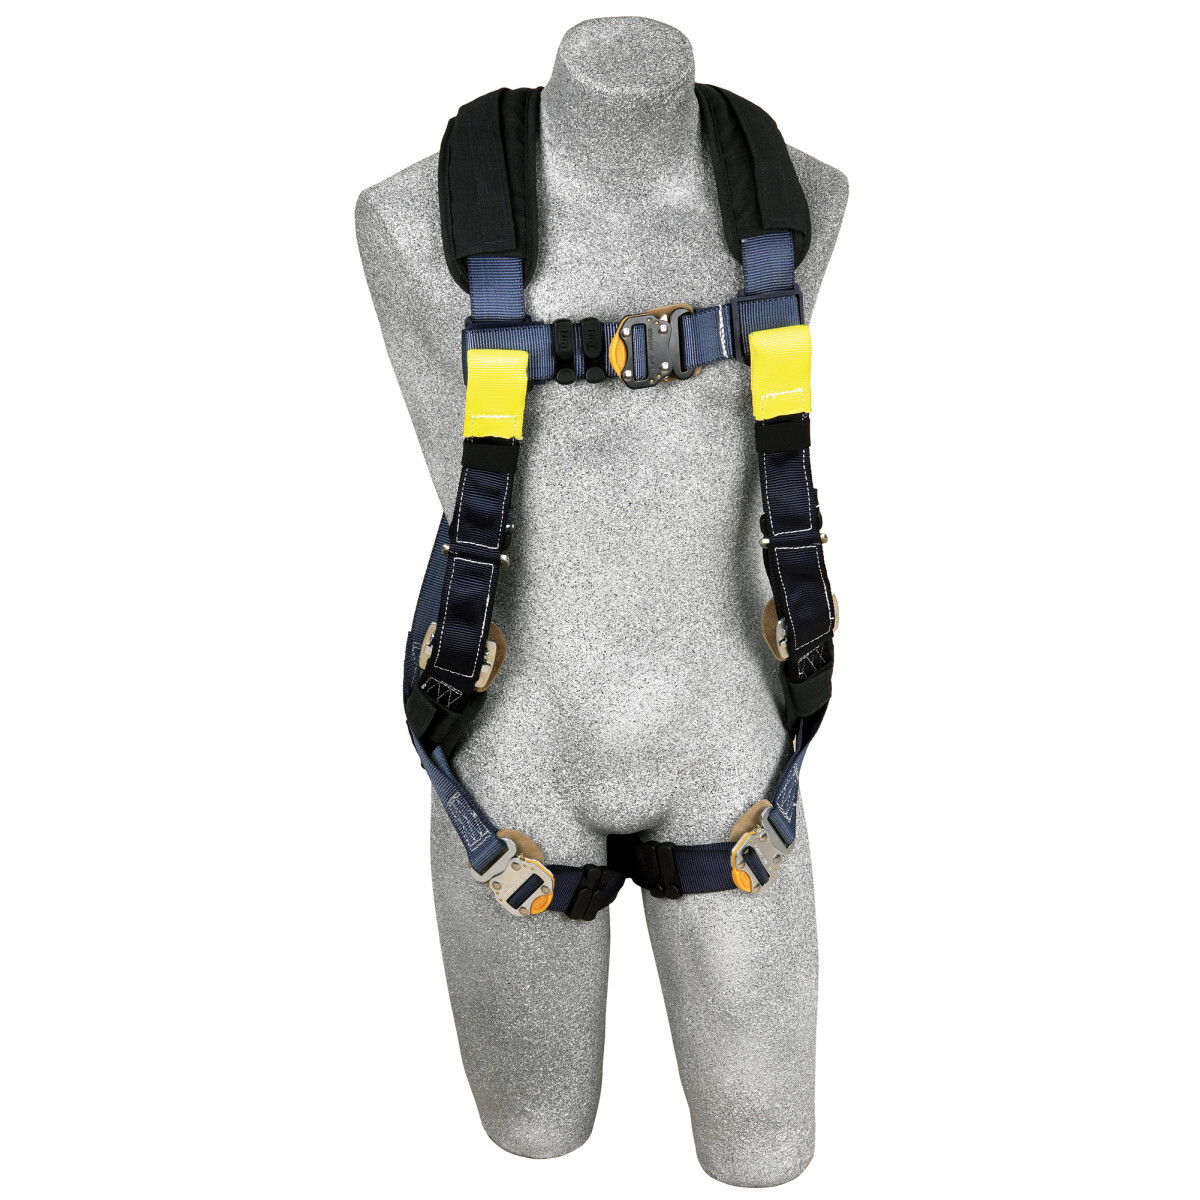 3M™ DBI-SALA® Medium ExoFit™ XP Arc Flash Full Body/Vest Style Harness With Back And Front Web Rescue Loop, Quick Connect Chest